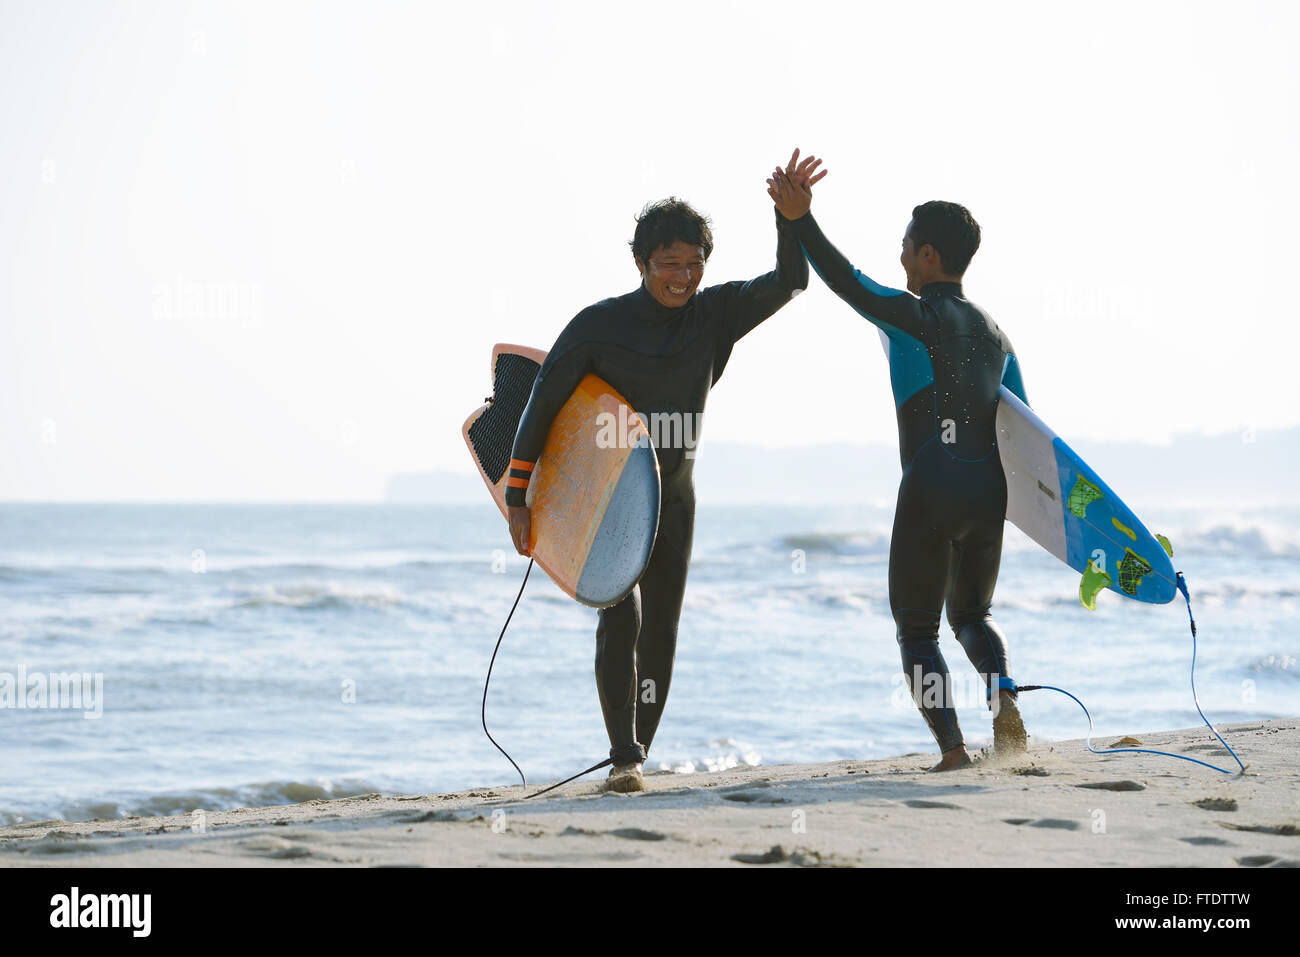 Japanese surfers on the beach Stock Photo